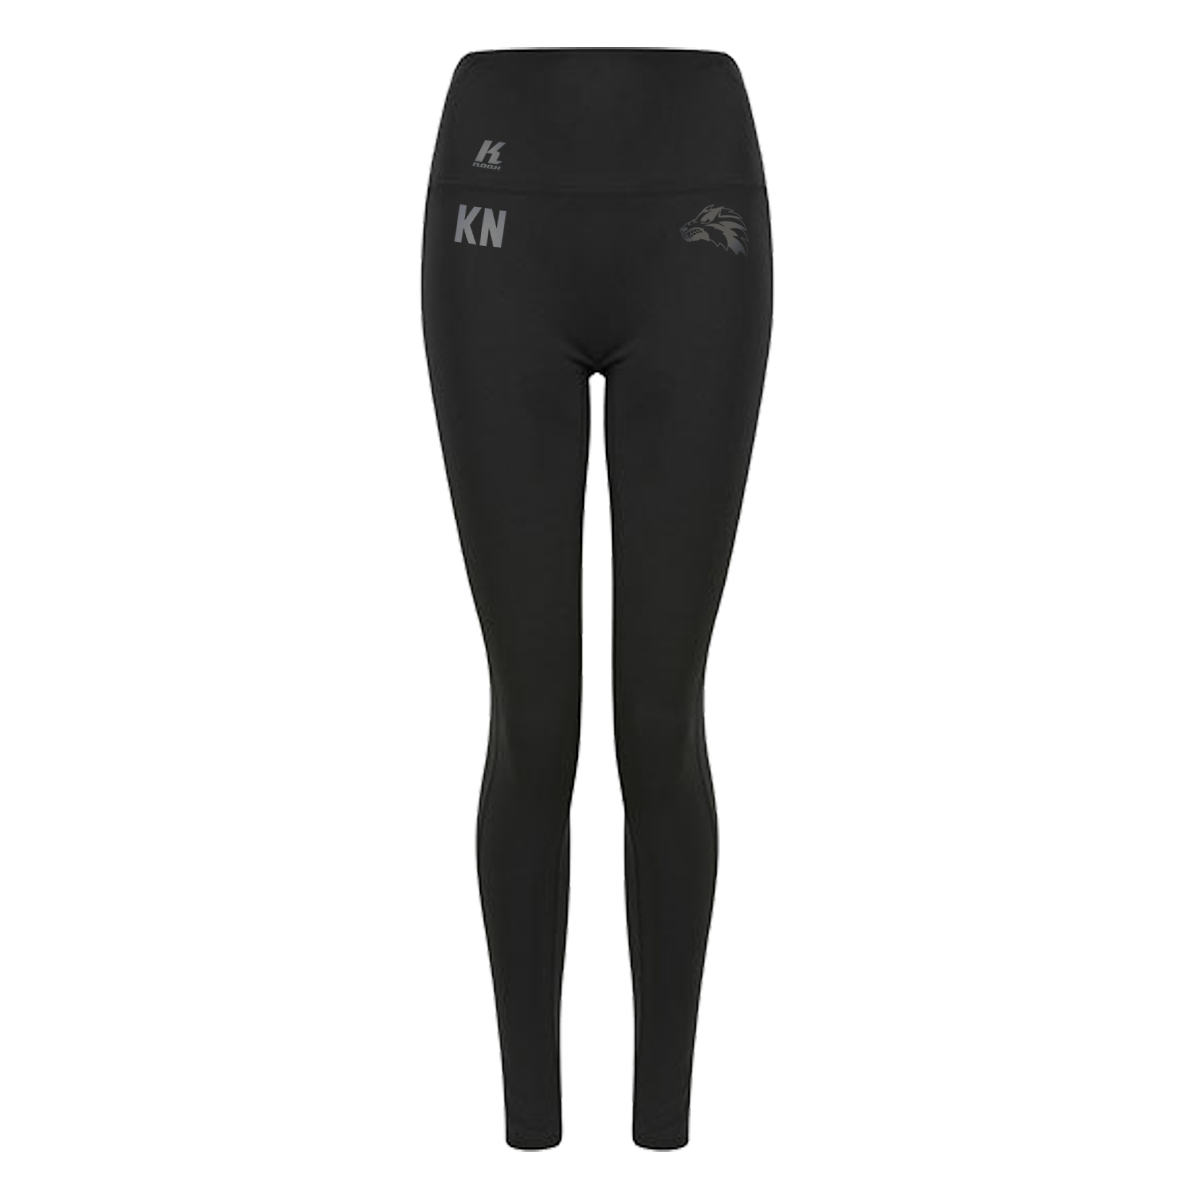 Wolves "Blackline" Womens Core Pocket Legging TL370 with Initials/Playernumber